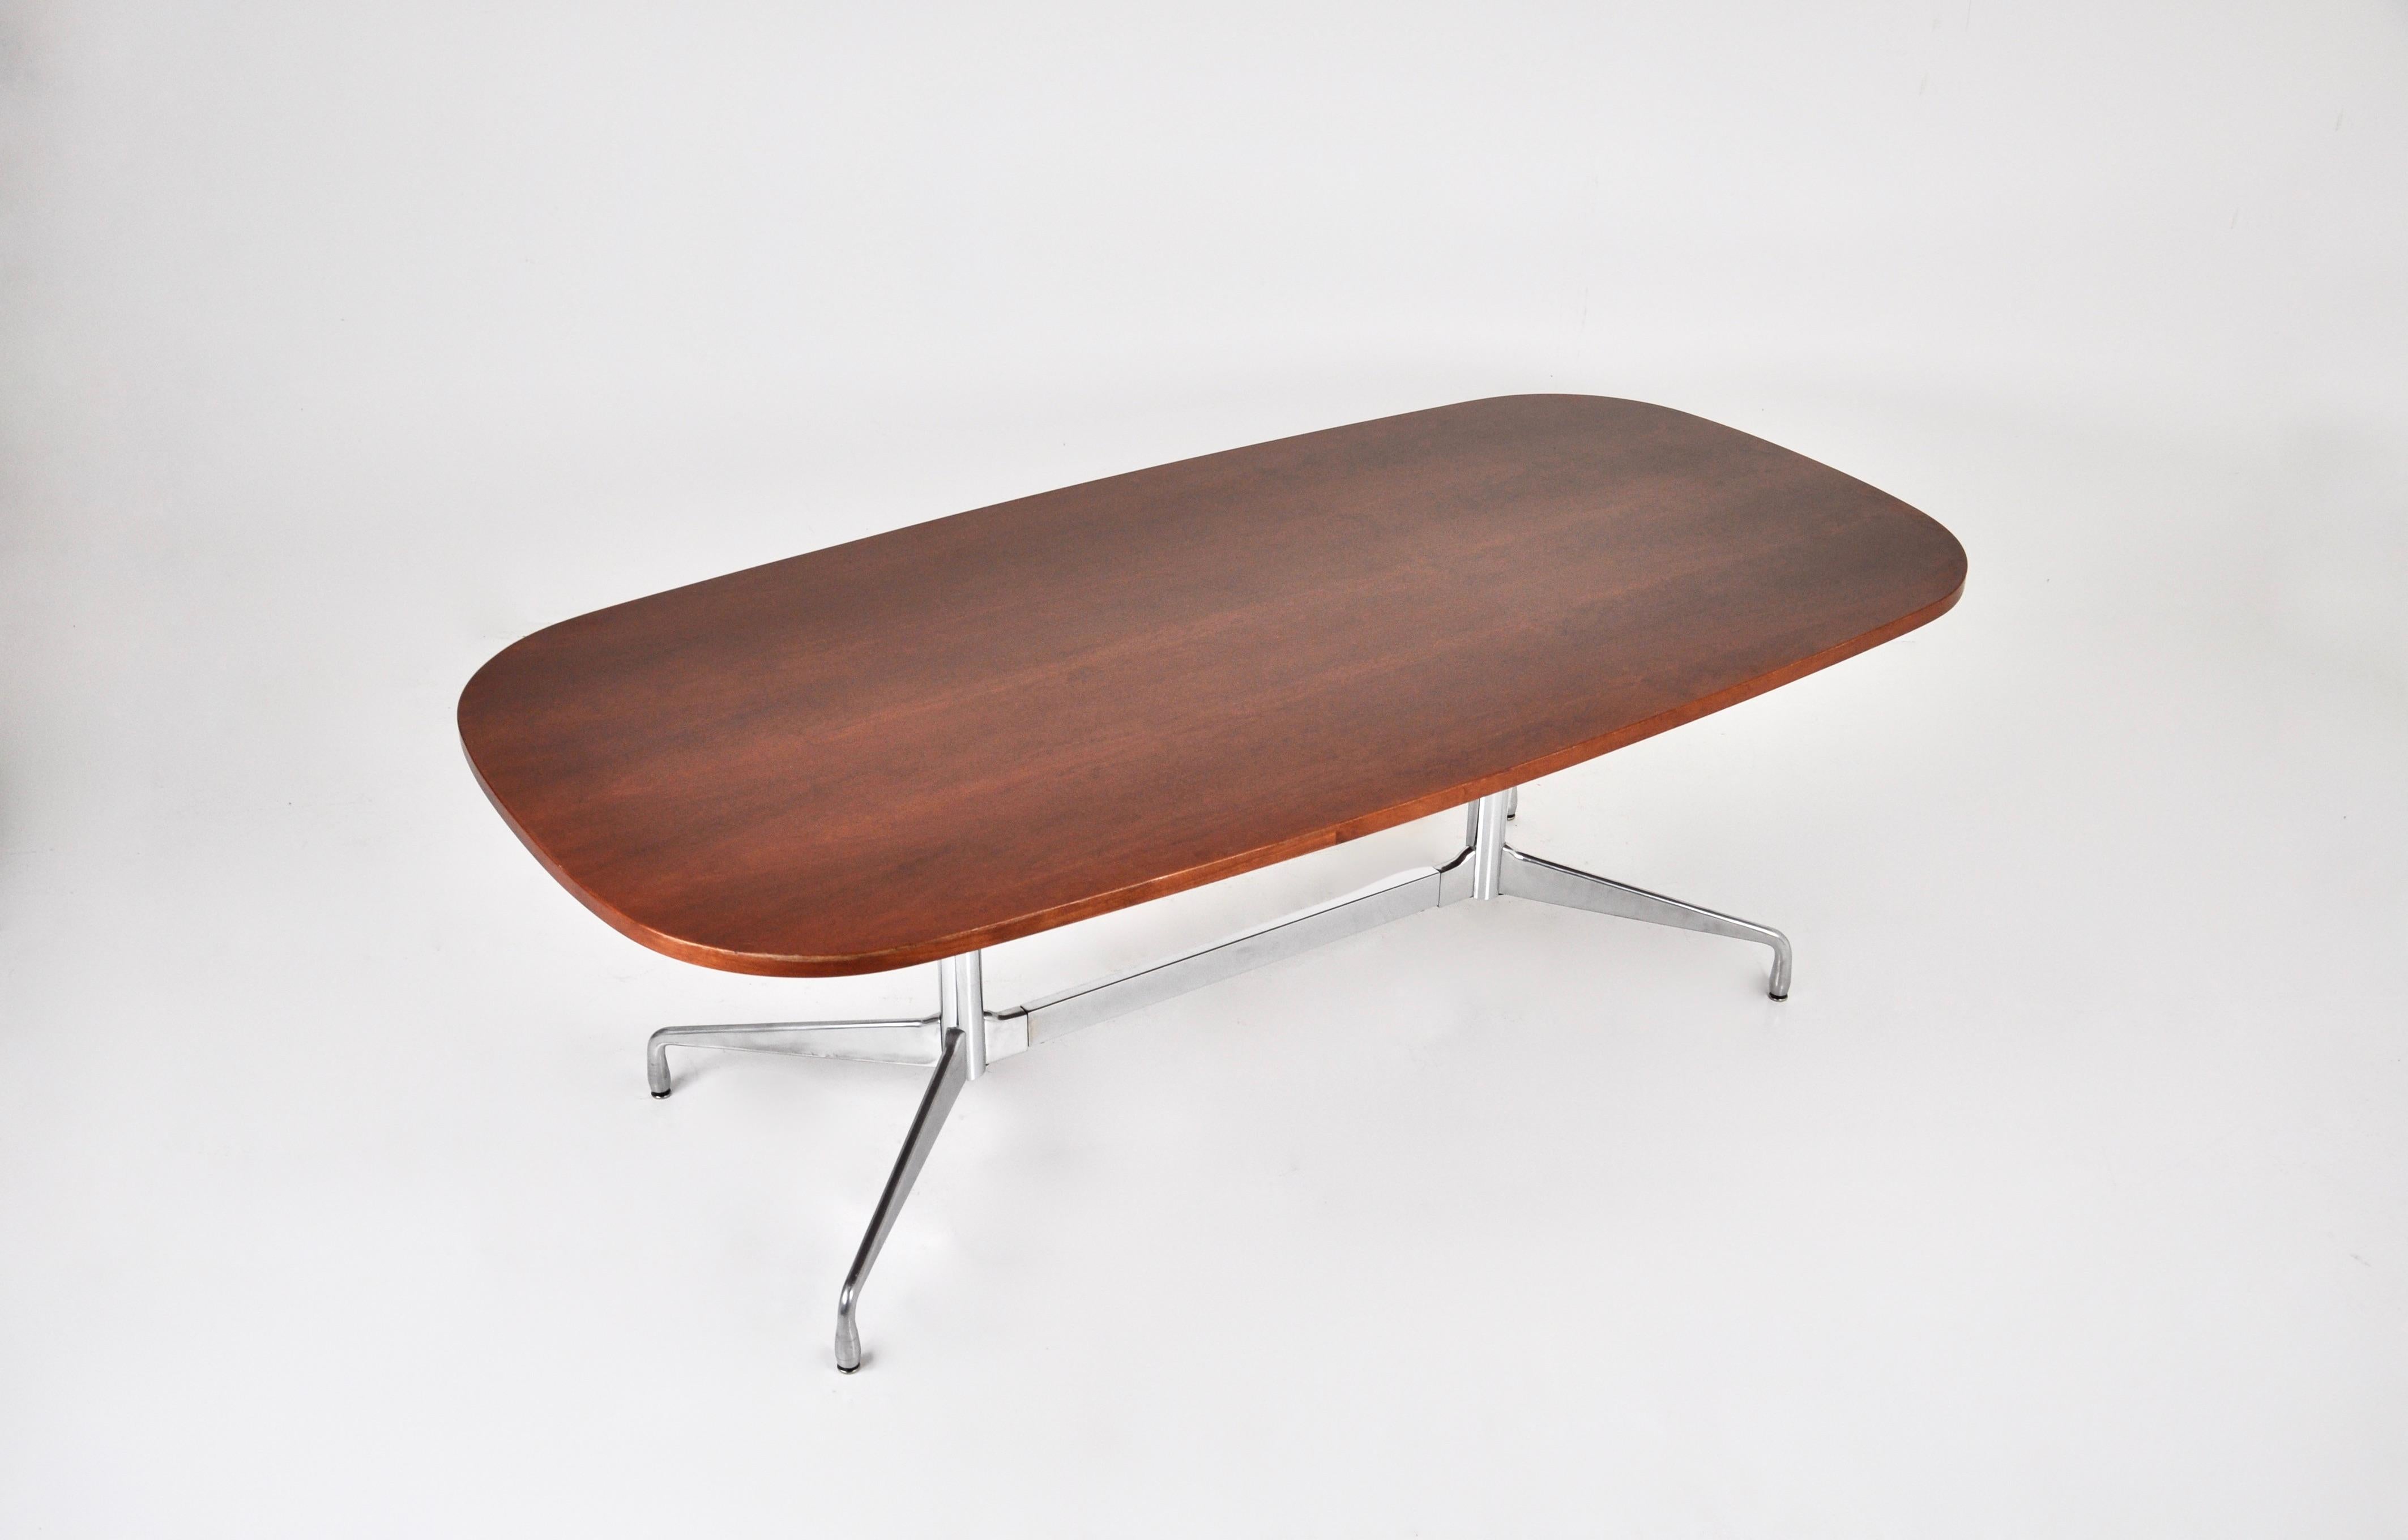 Wooden table with metal leg by Charles & Ray Eames. Wear due to time and age of the table.